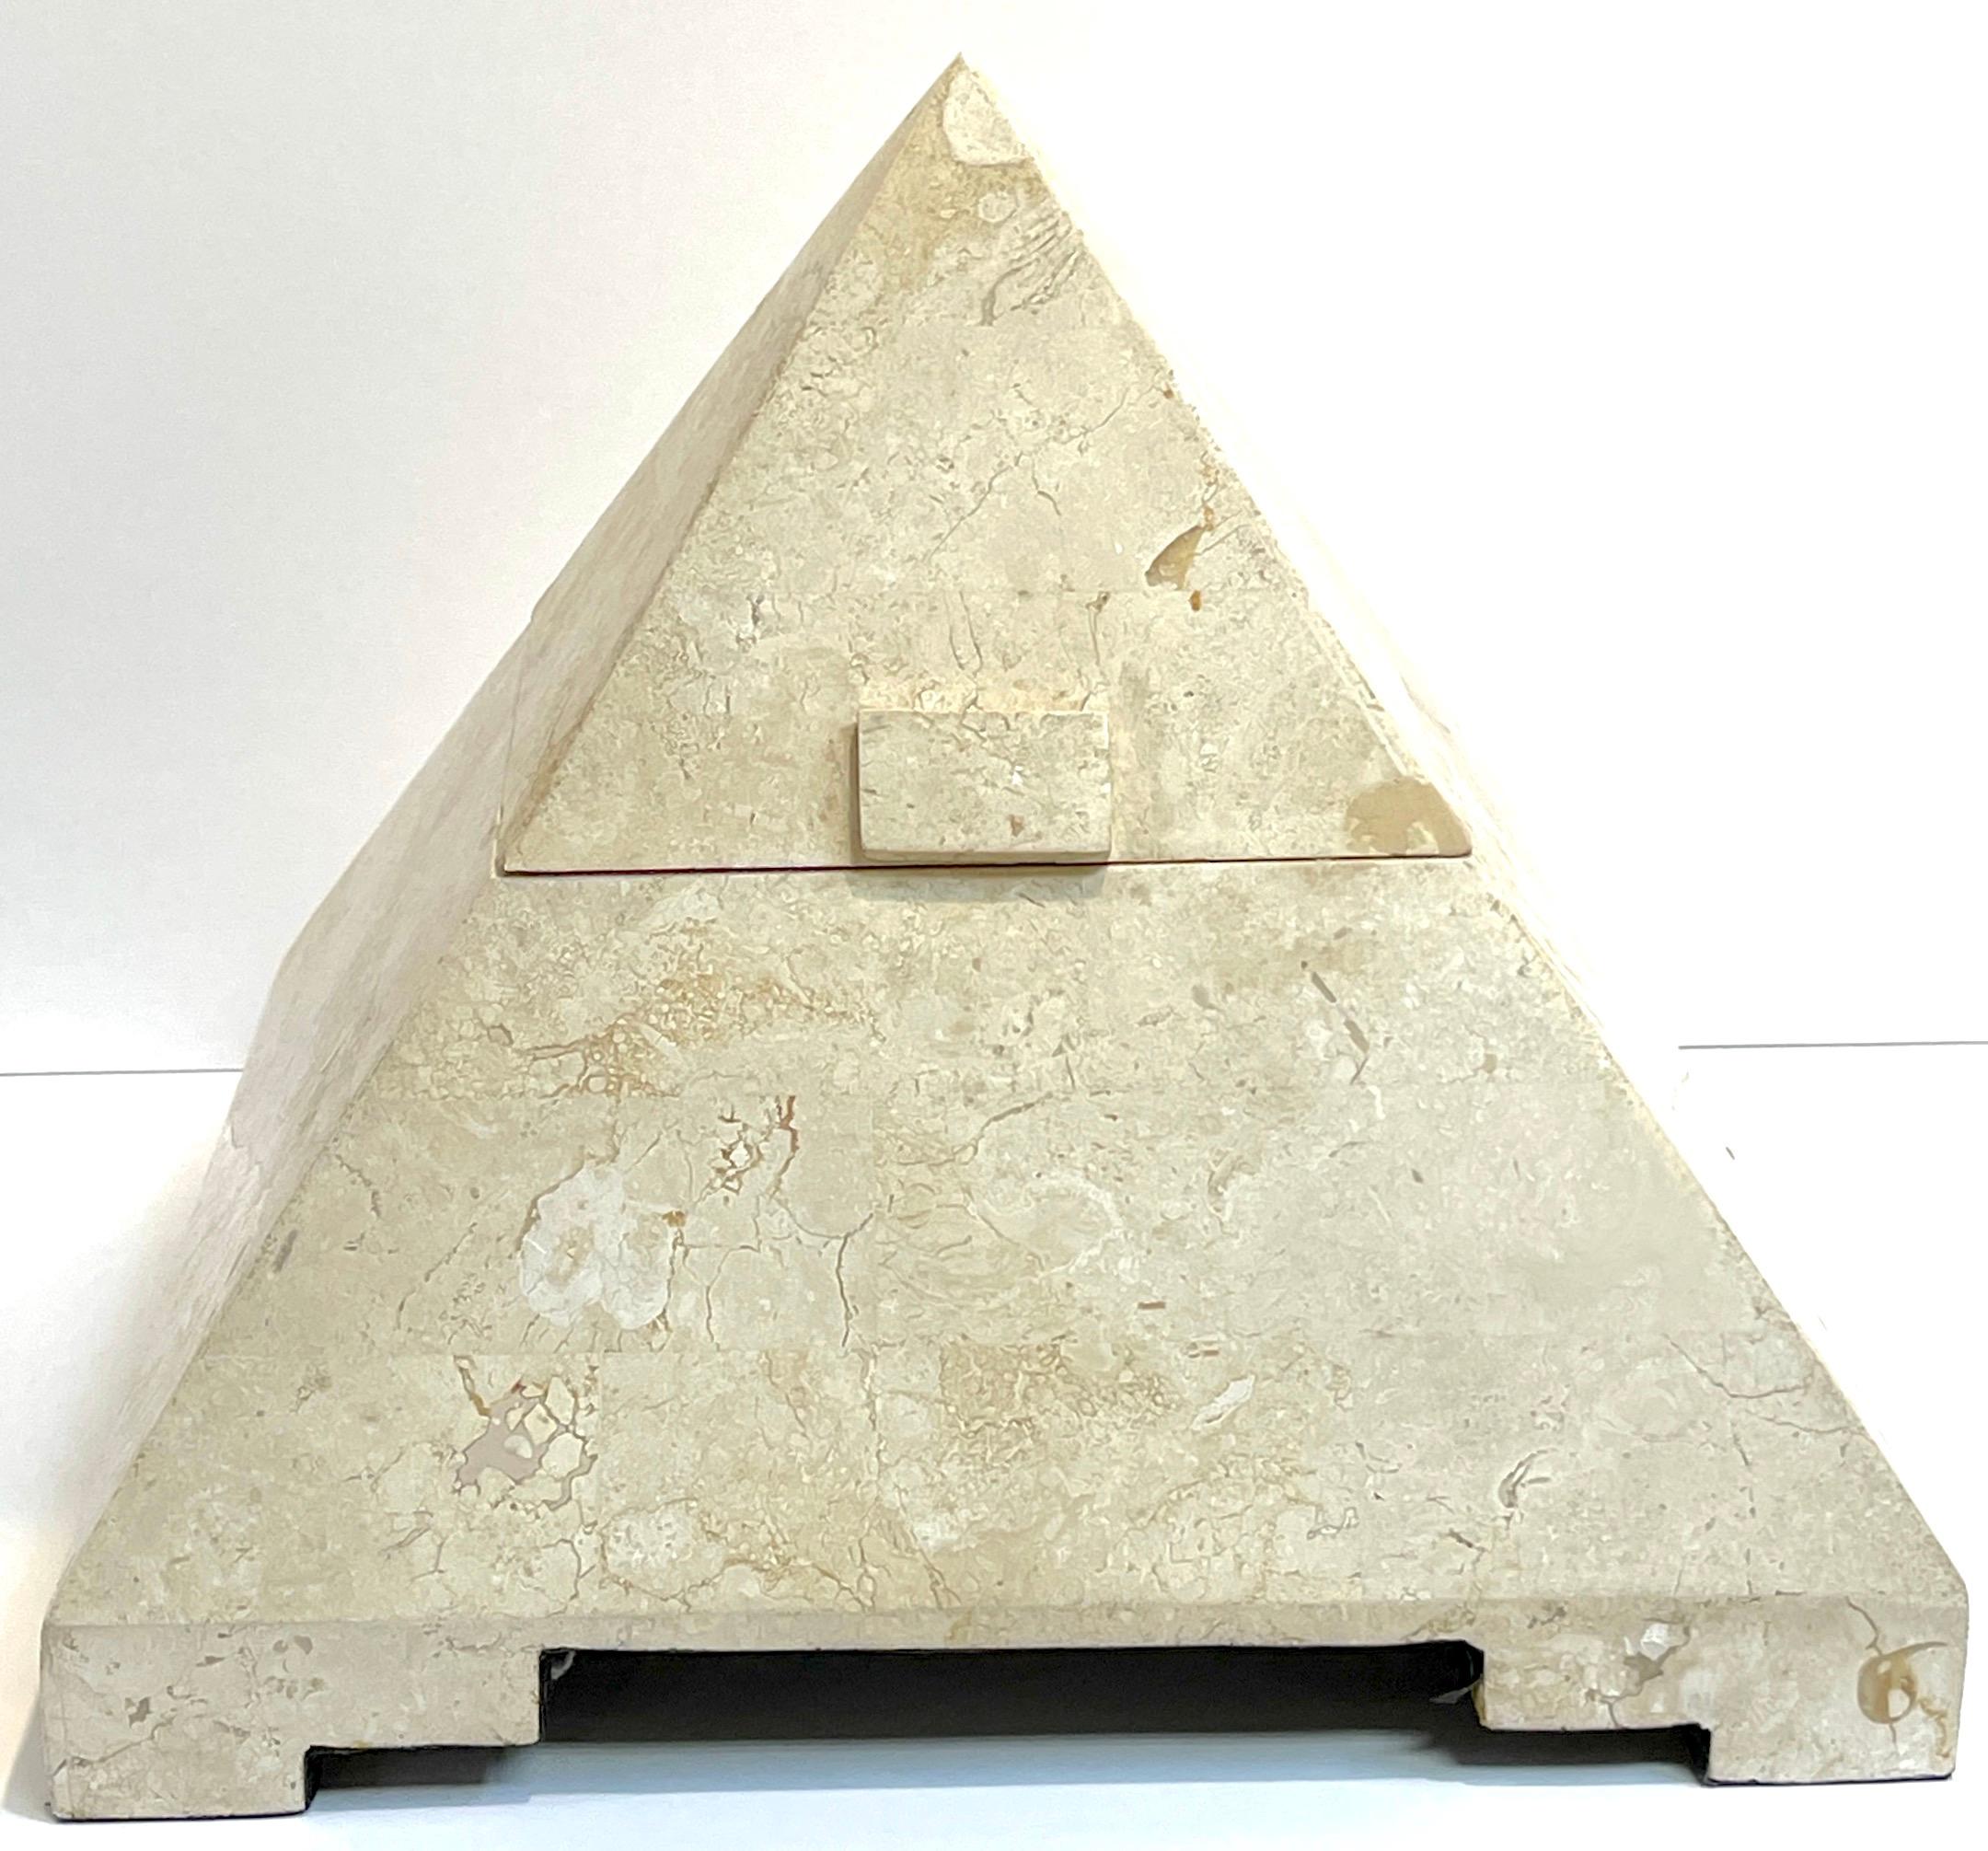 Modern Tessellated Stone Inlaid Pyramid Hinged Box  
Add a touch of modern elegance into your space with this captivating Modern Tessellated Stone Inlaid Pyramid Hinged Box. This piece not only serves as a functional storage and is a striking work